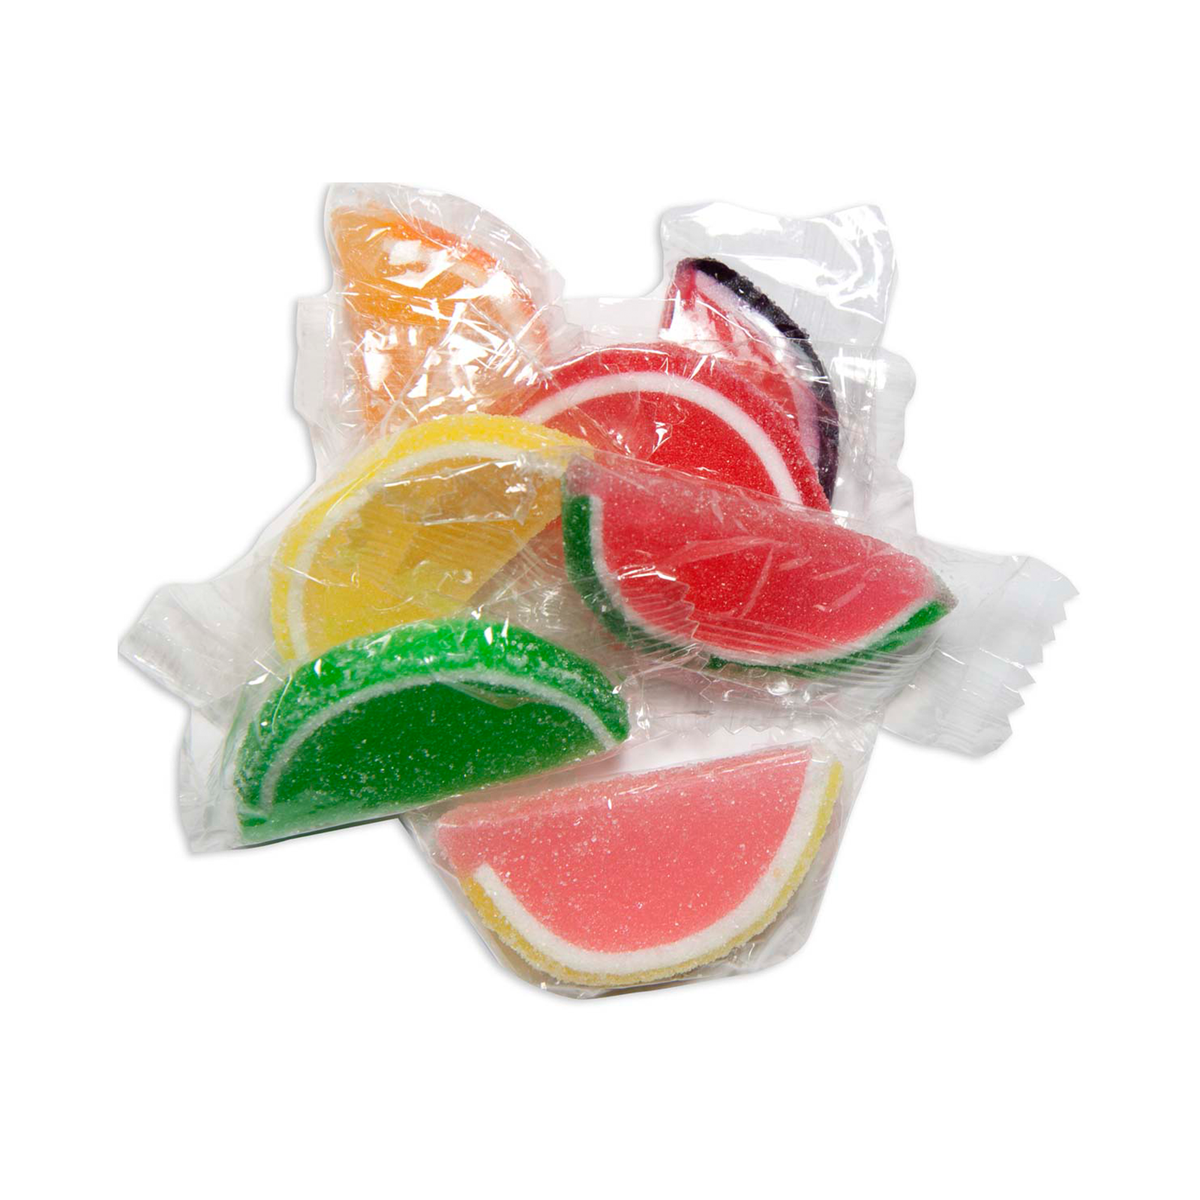 Assorted Fruit Jelly Slices